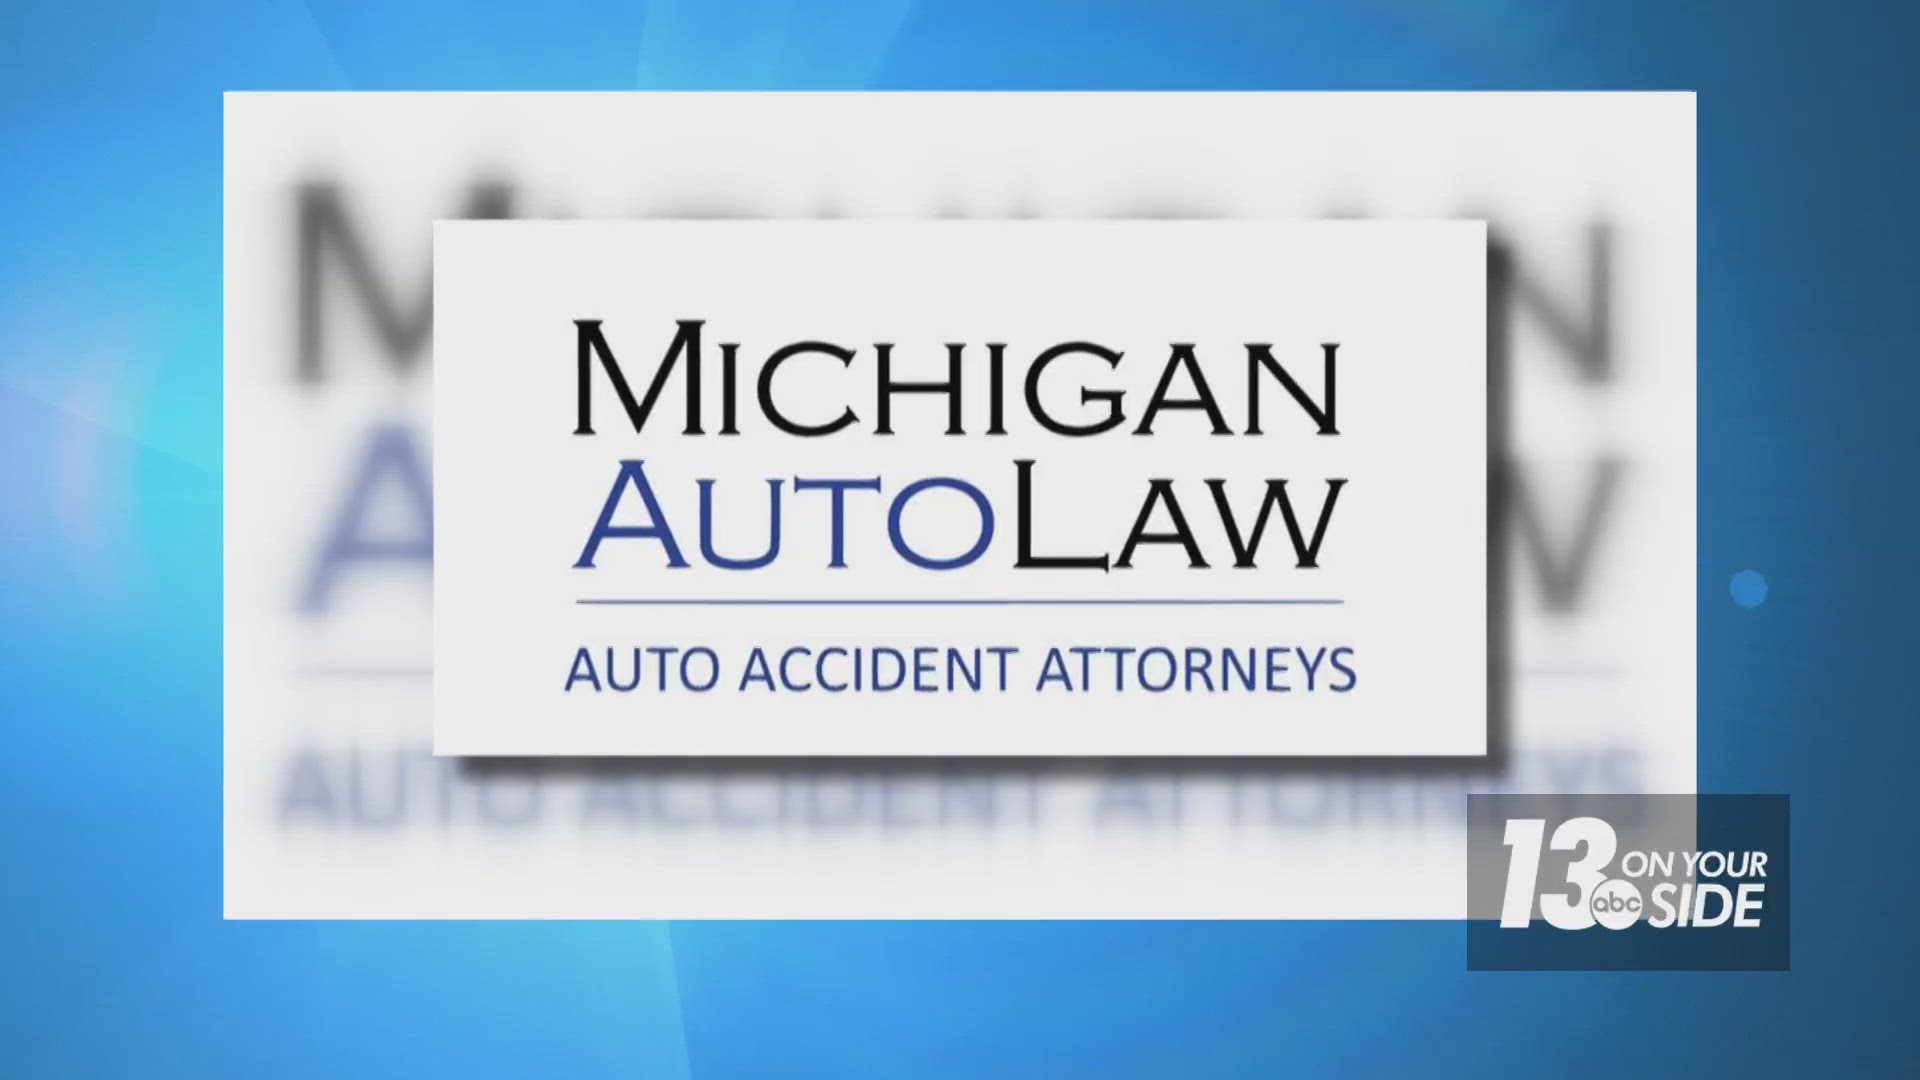 Michigan Auto Law attorney Brandon Hewitt joined us to discuss the laws around children riding in vehicles.